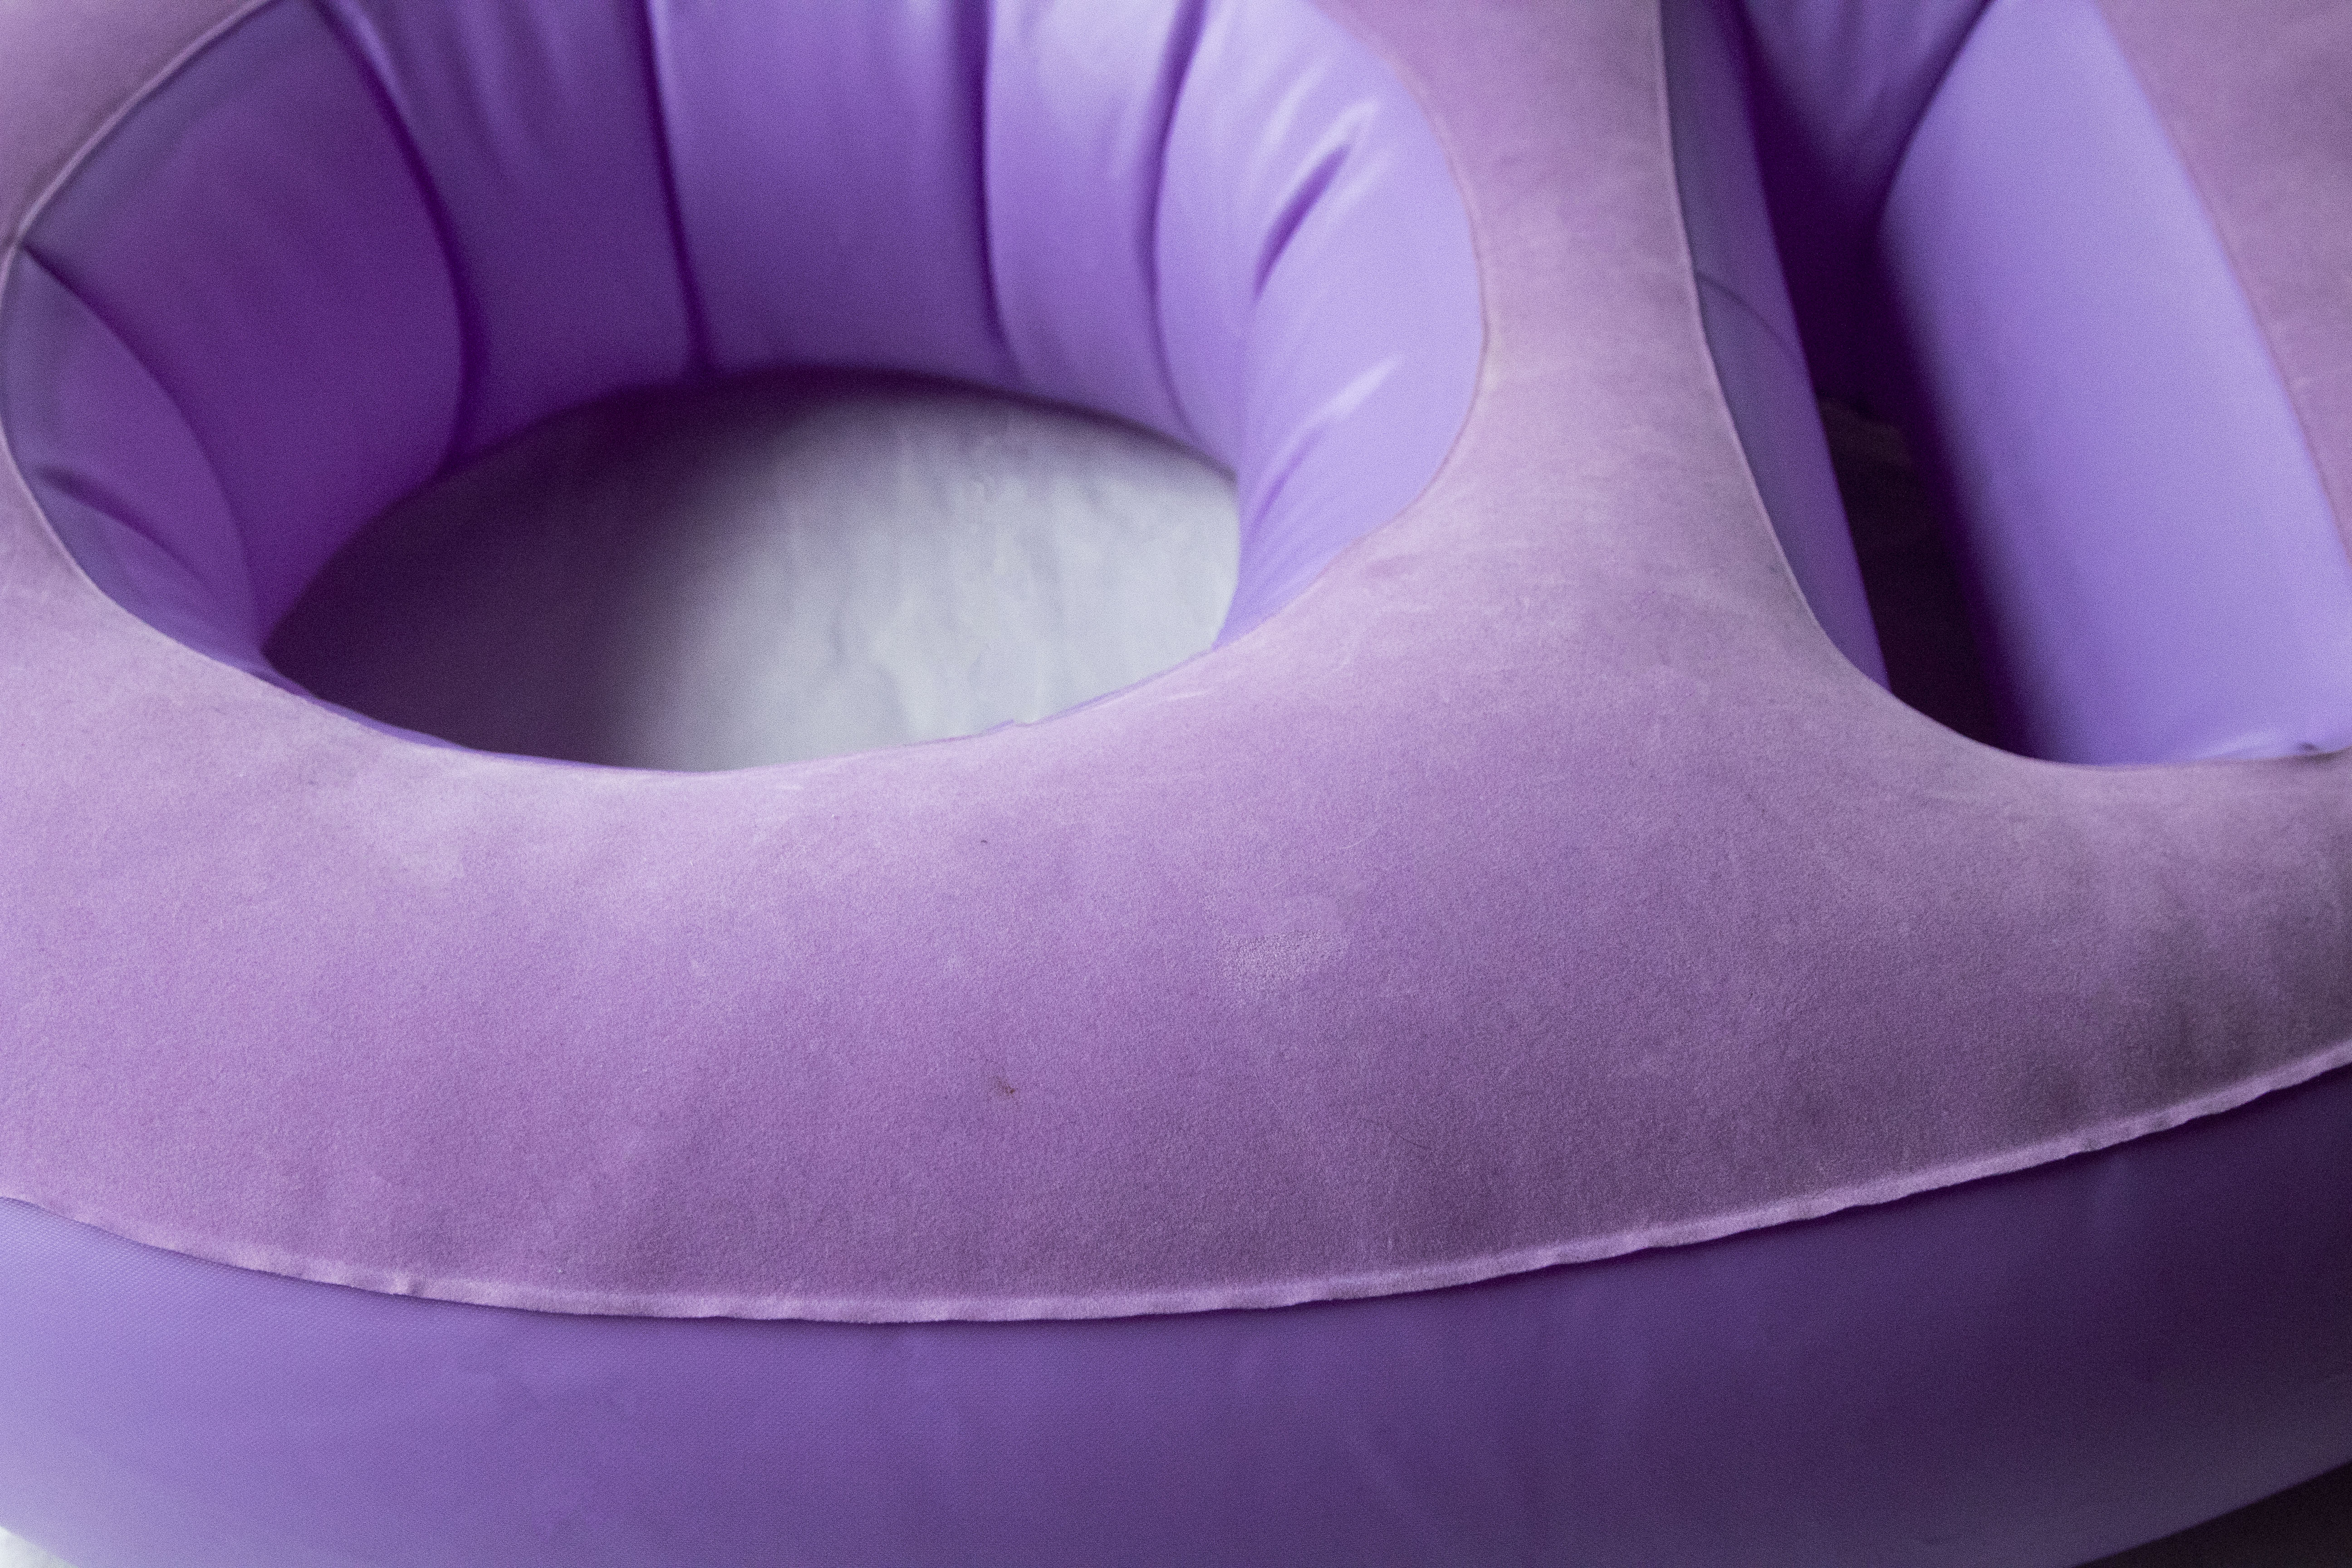 Purple, face-down pregnancy pillow called Tummy Cradle, focus on belly cradle area which is easily inflated or deflated to accommodate any size pregnant belly.